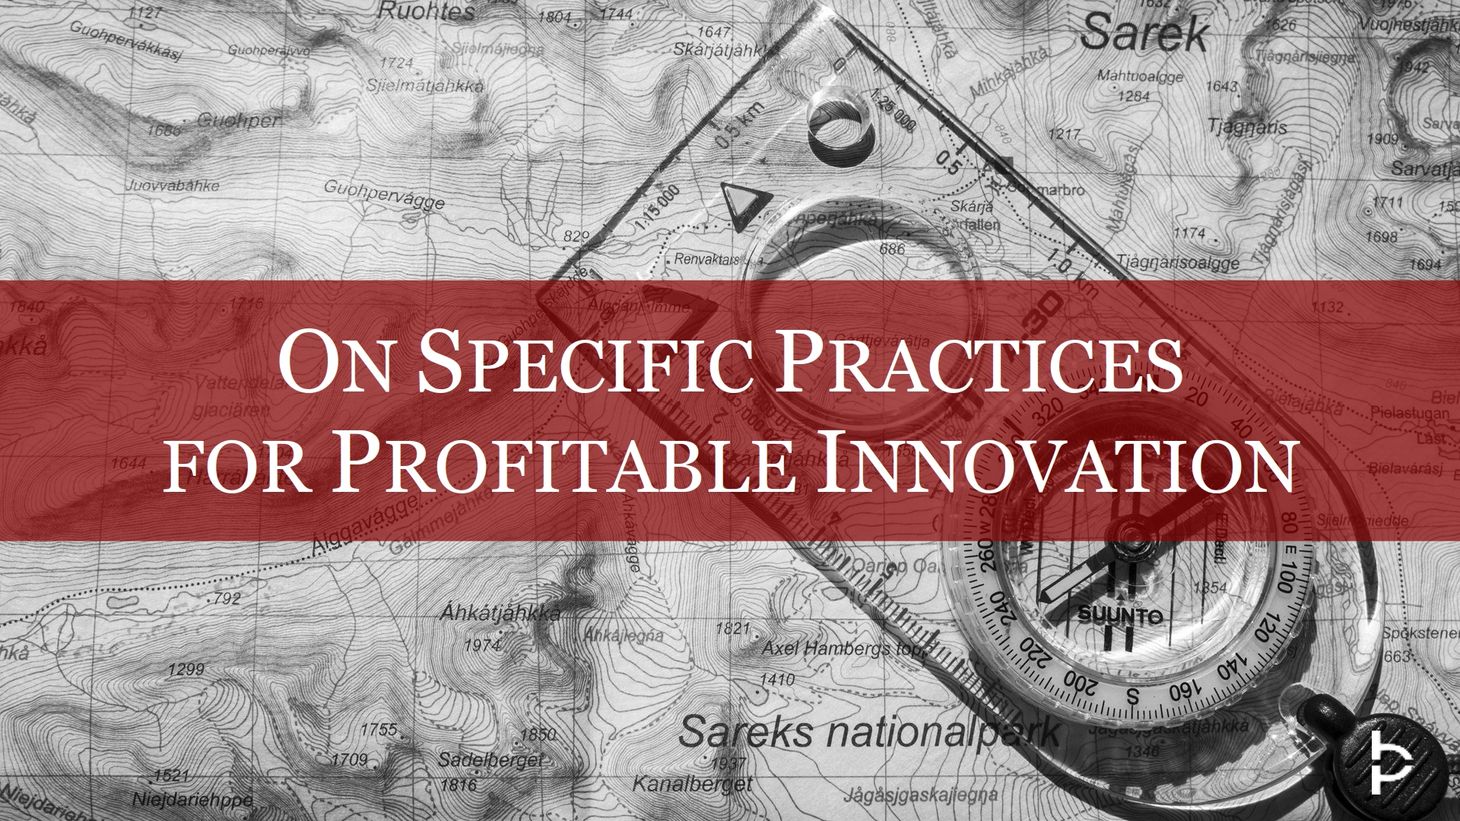 On specific practices for profitable innovation